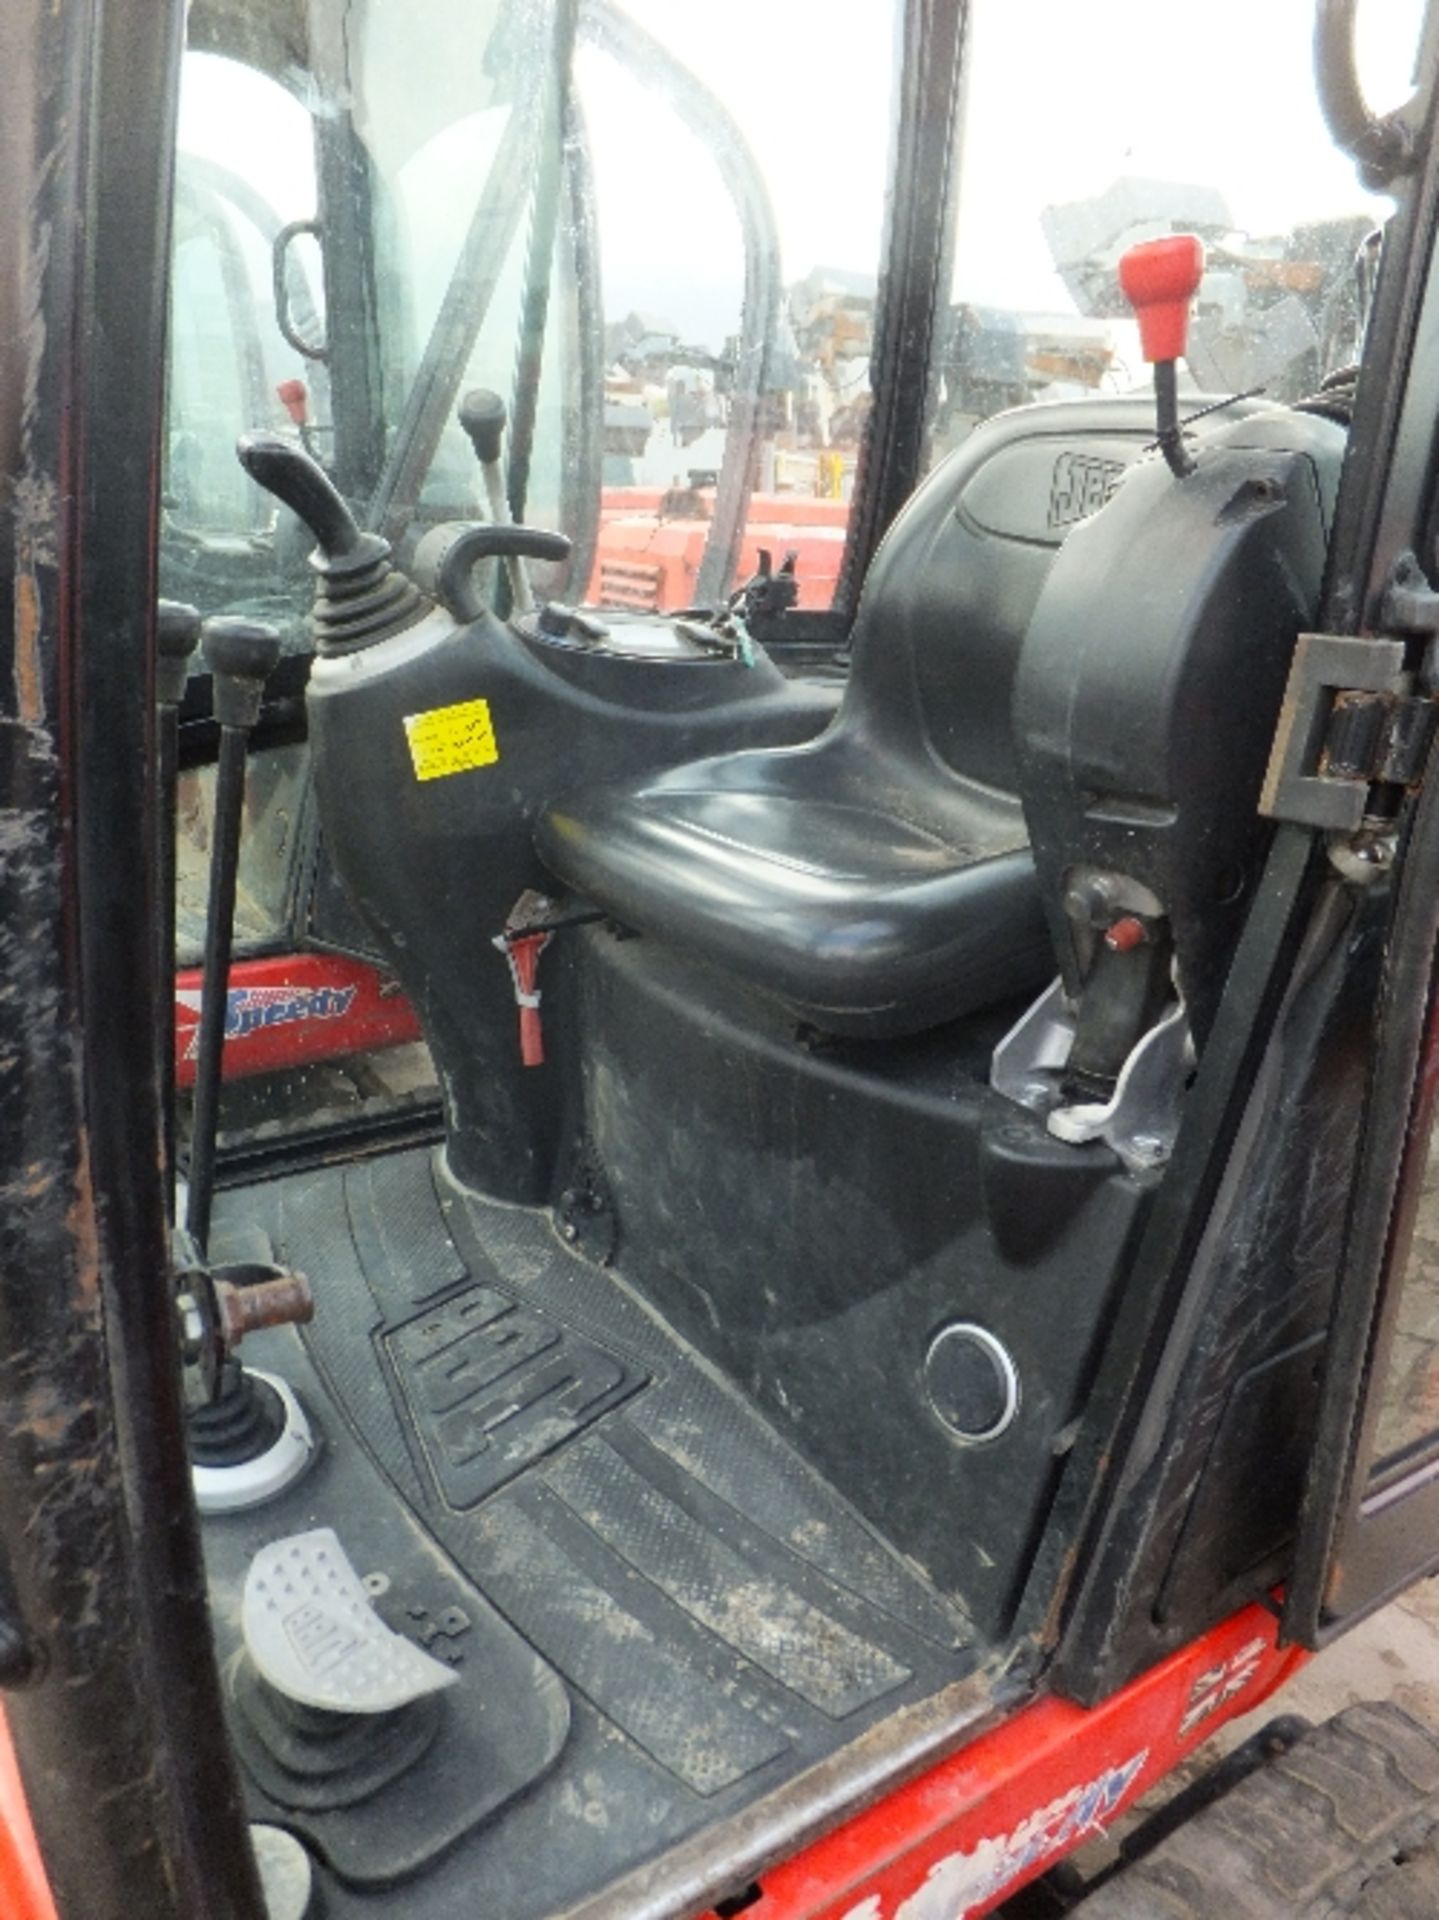 JCB 801.8 CTS mini digger (2011) 1178 hrs  WLCA112051866 1 bucket, expanding tracks, RDD, coded key - Image 4 of 5